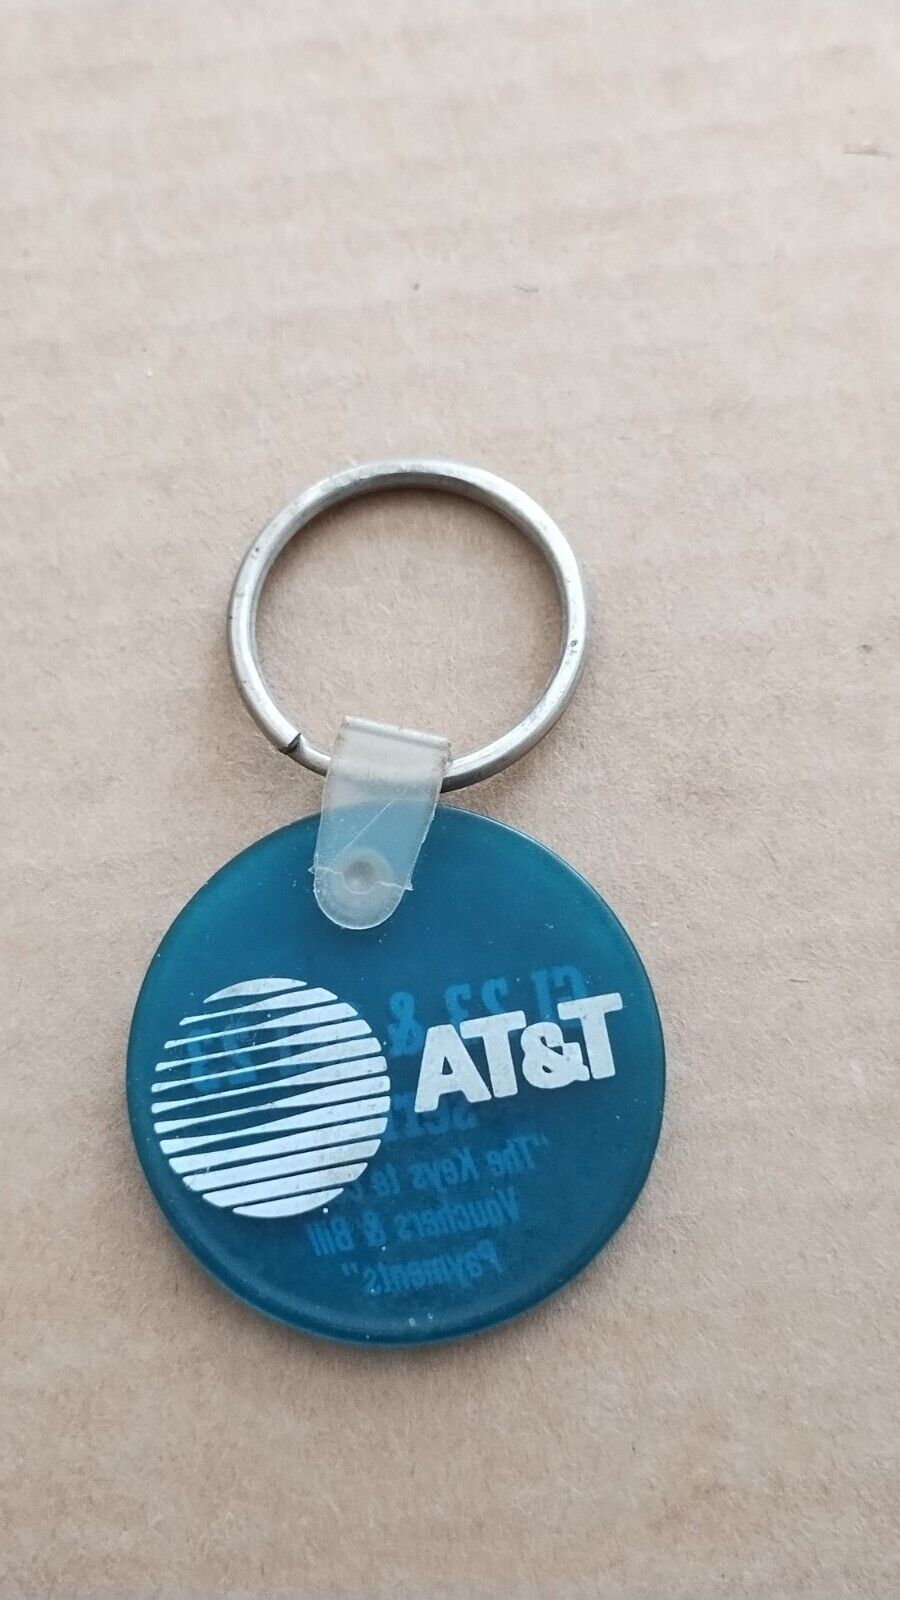 AT&T Telephone The Right Choice Vintage Keychain Key Ring FOB CU VINTAGE 